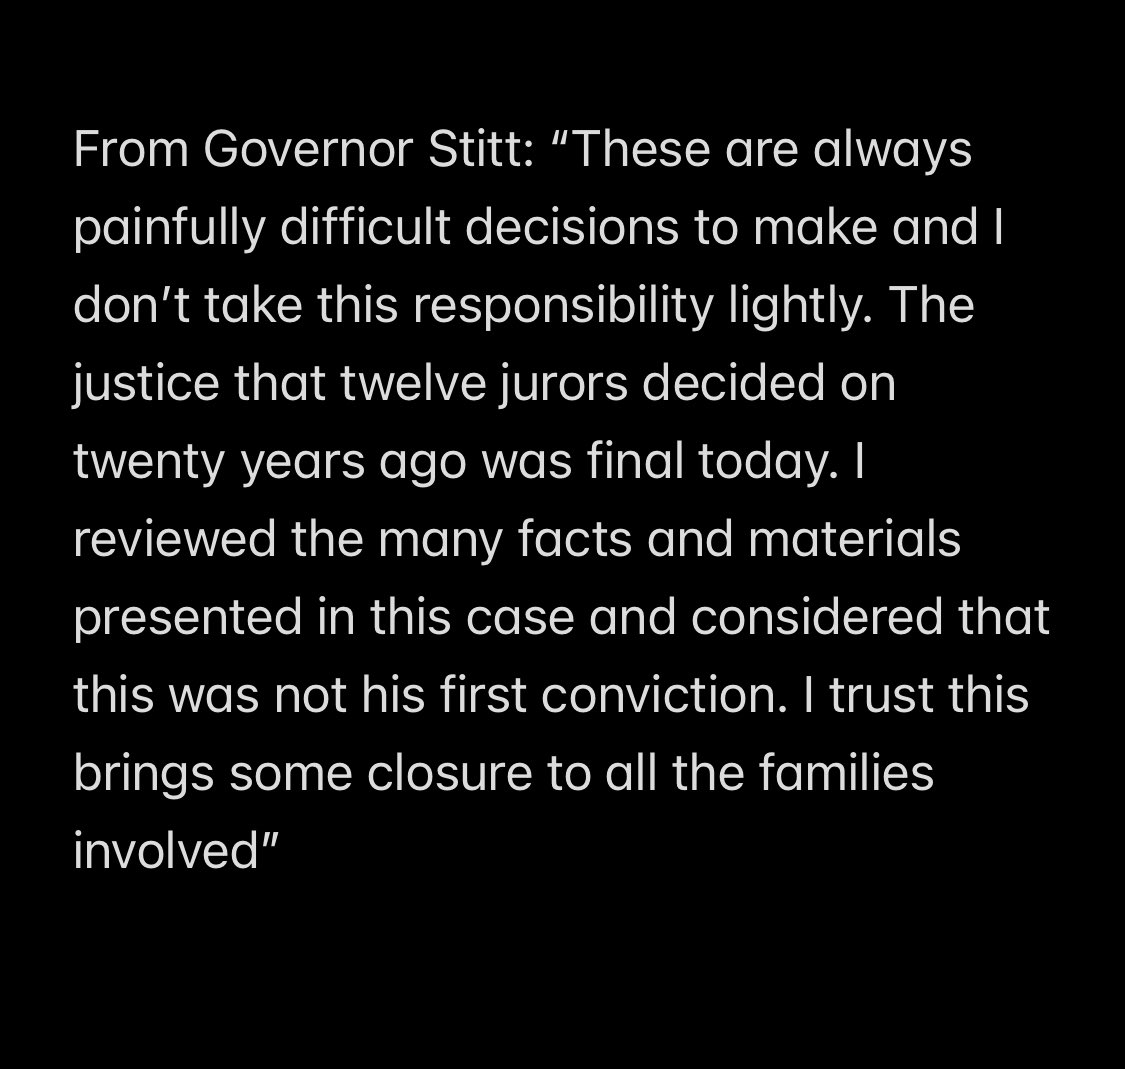 Just received this statement from @GovStitt on denying clemency to Phillip Hancock today despite the recommendation from the Pardon and Parole Board: